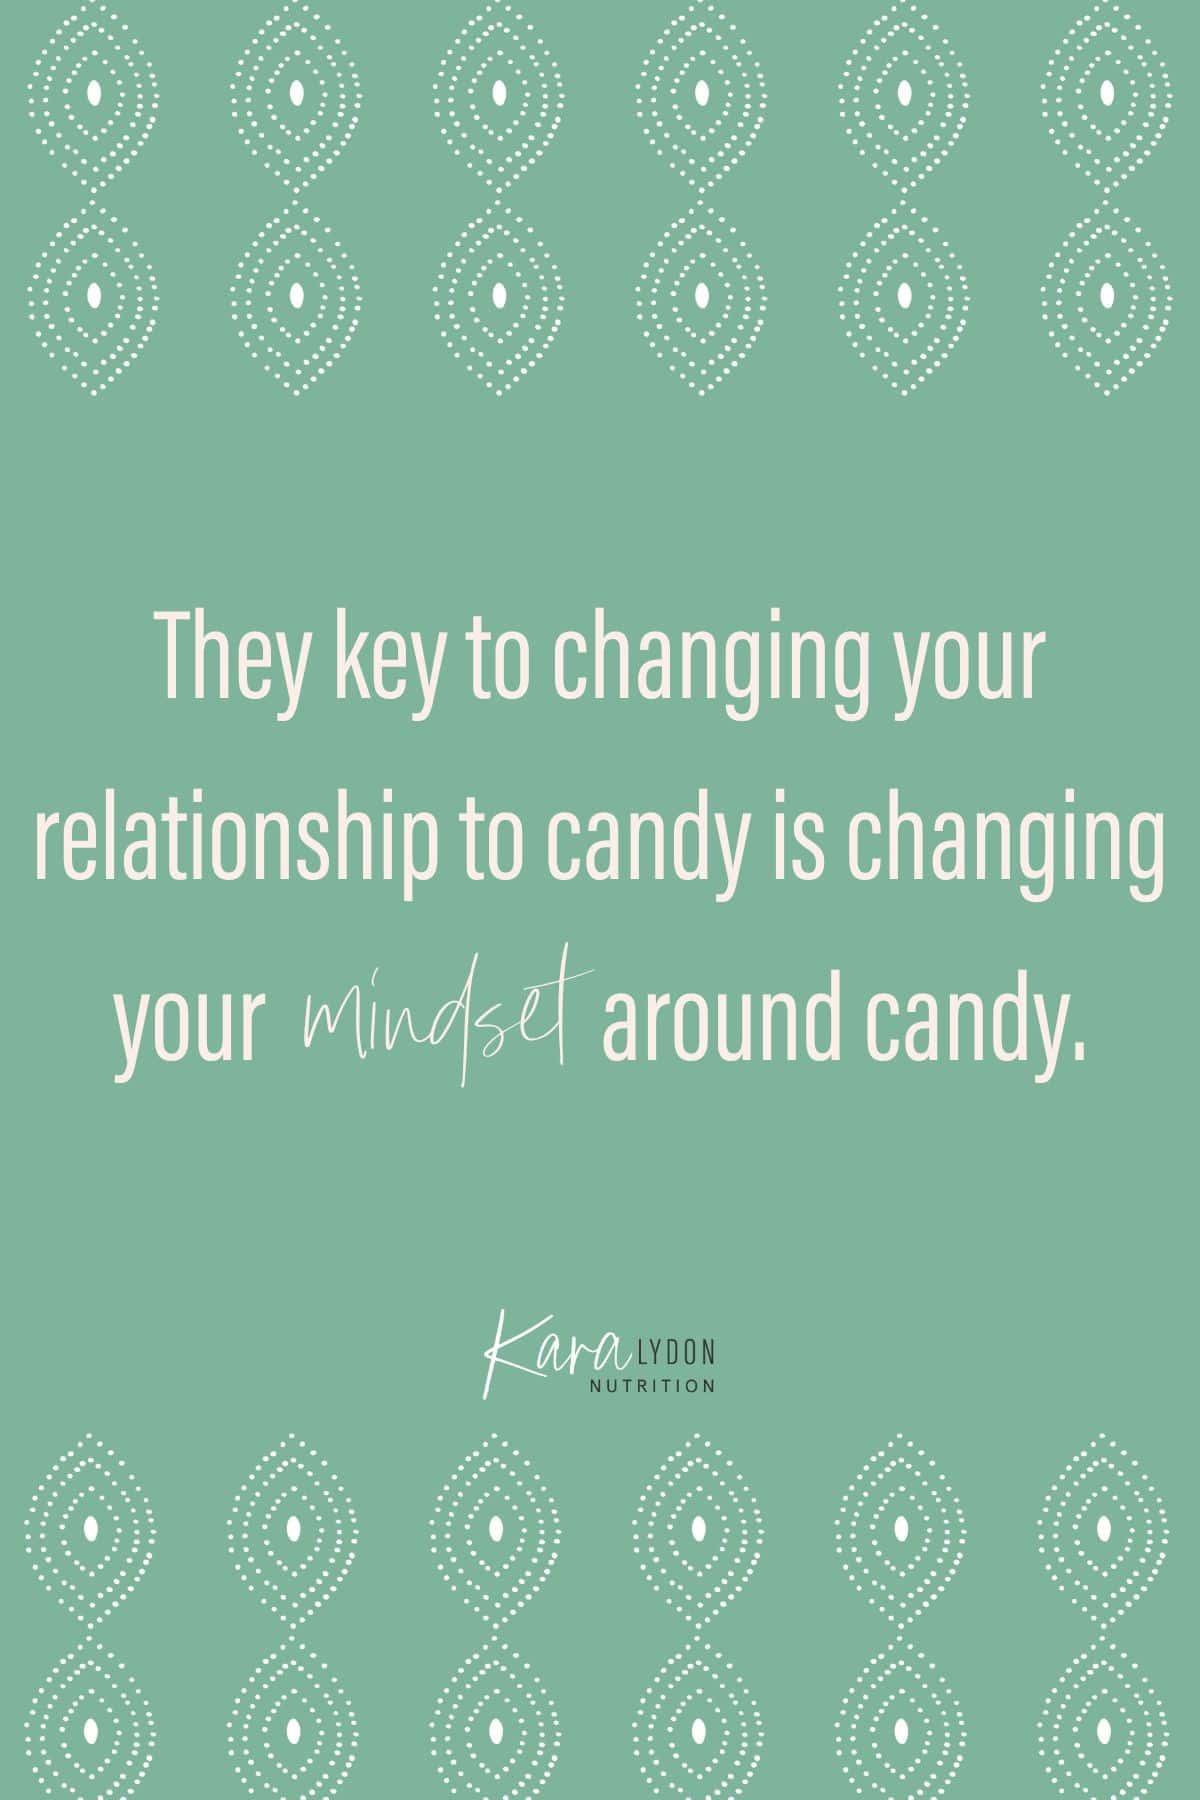 Graphic with quote: "The key to changing your relationship to candy is to change your mindset about candy."